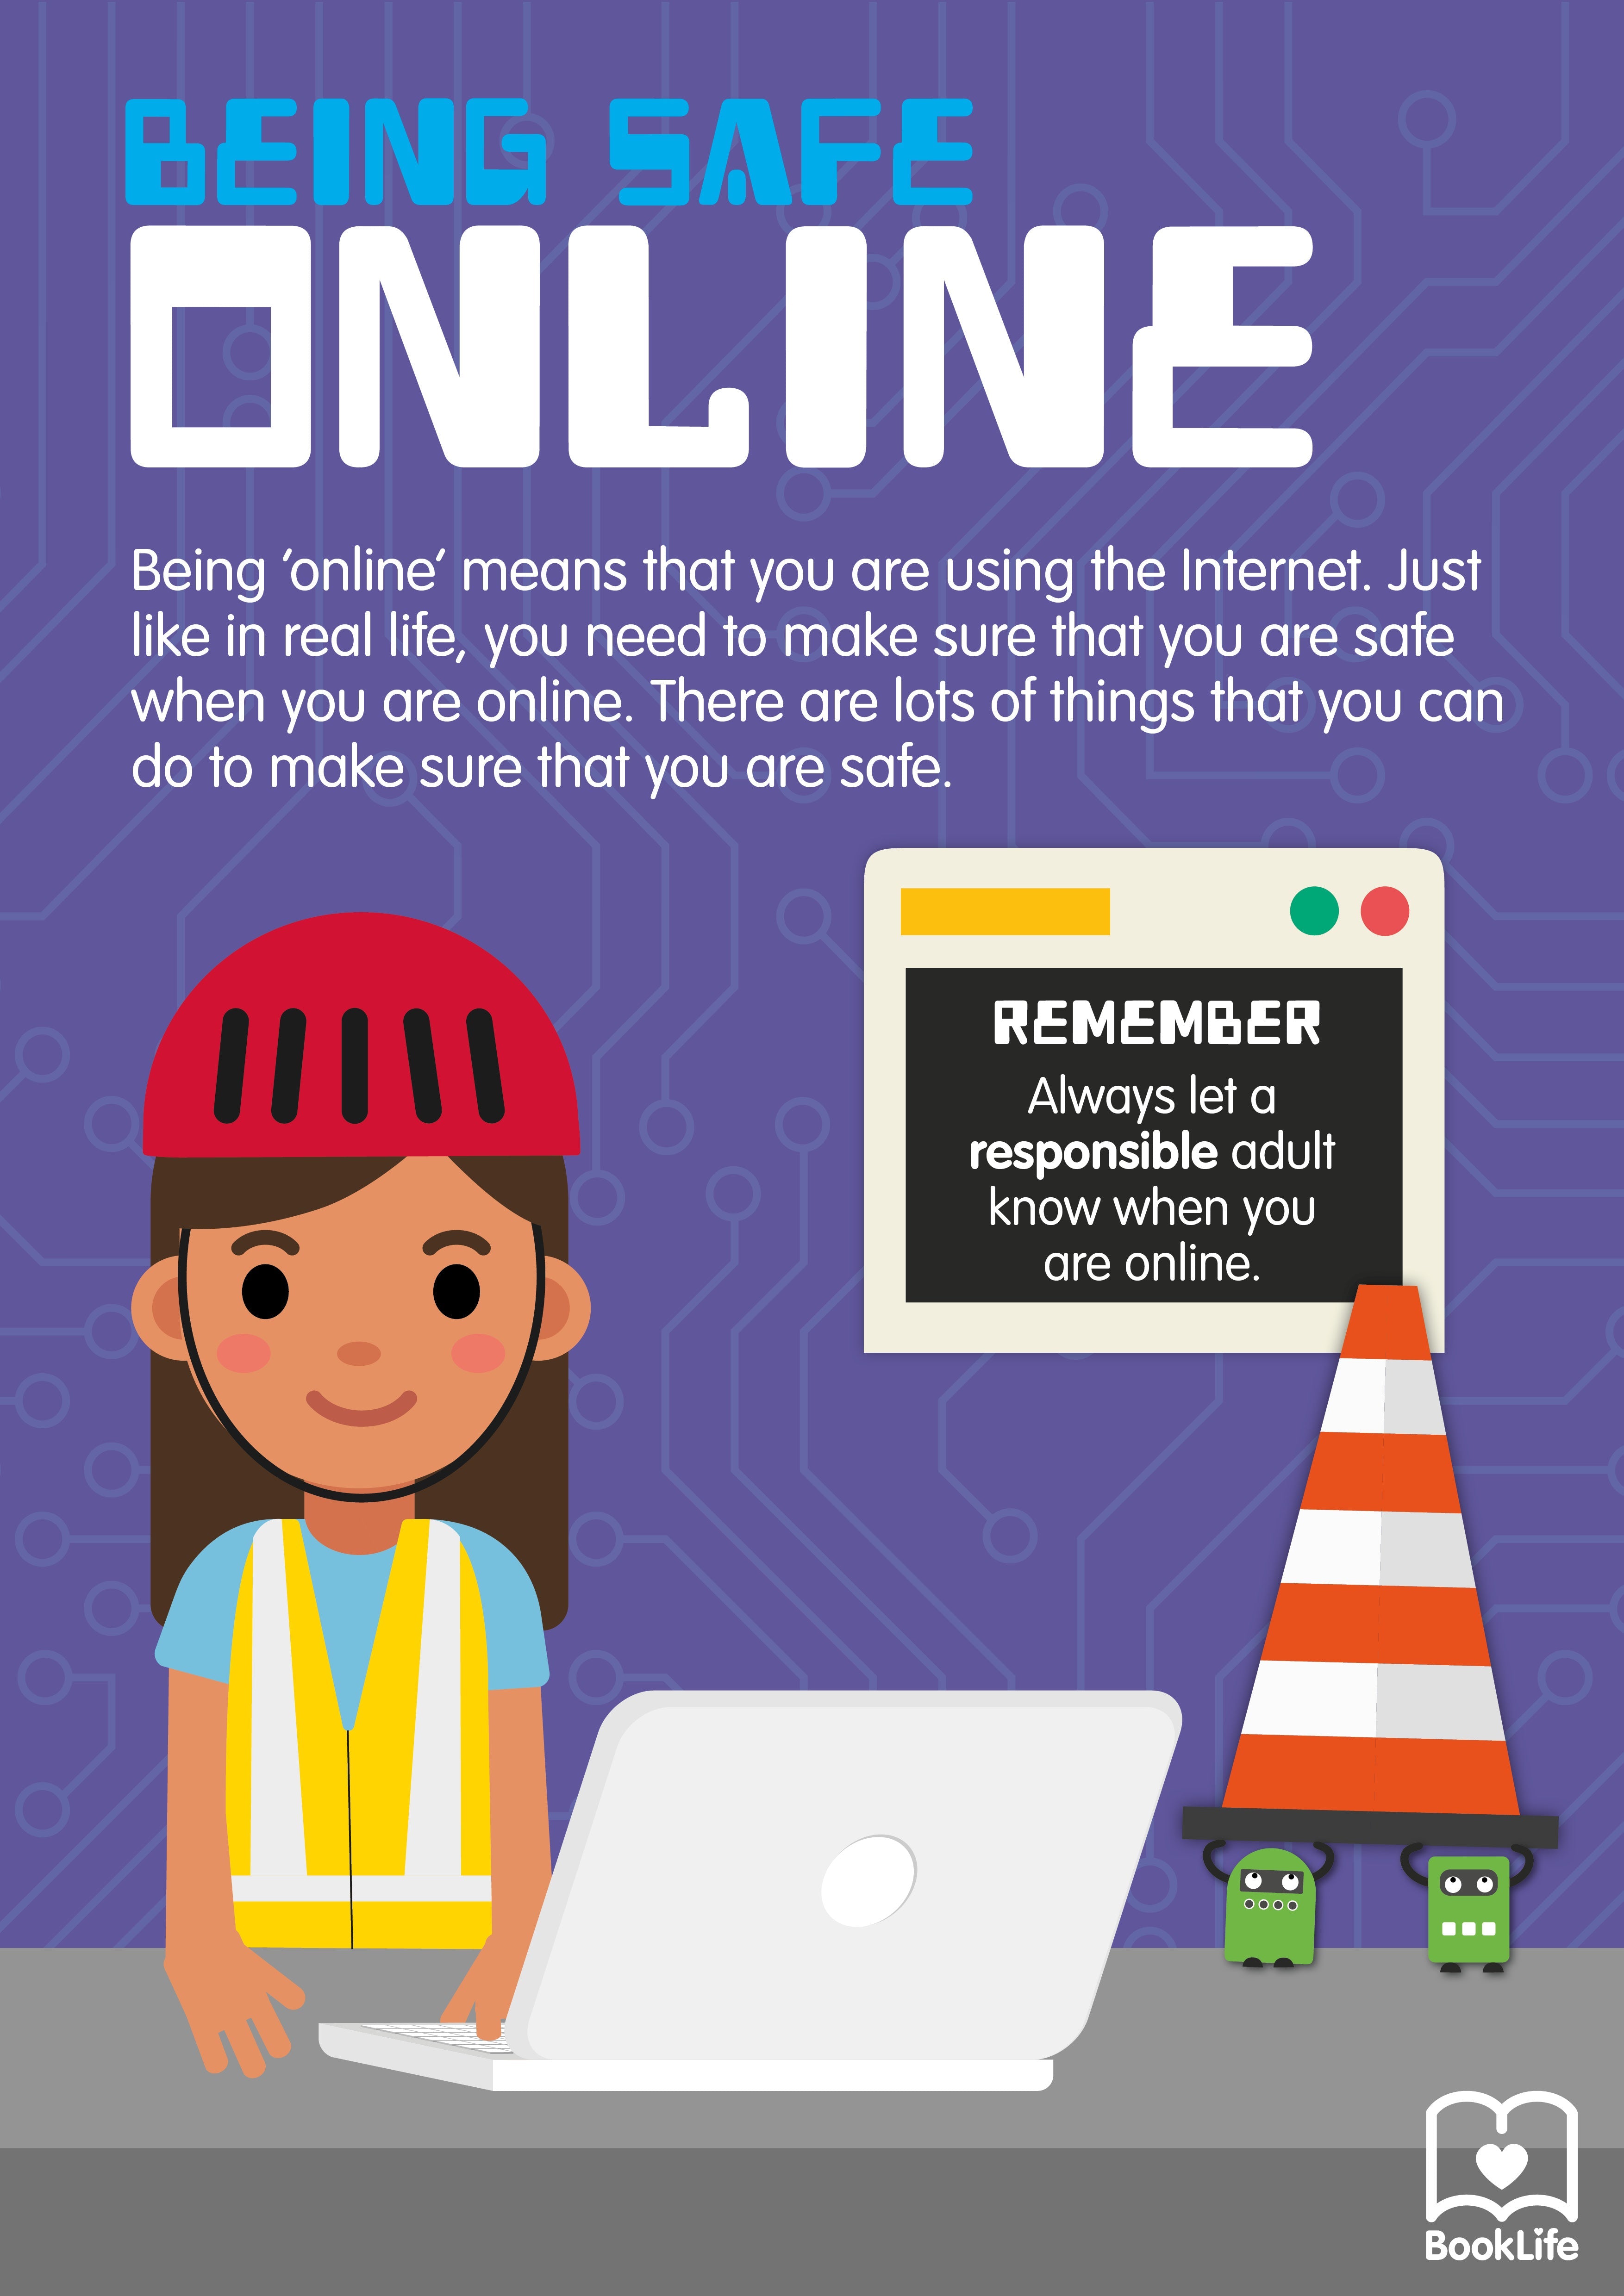 Free Being Safe Online Poster by BookLife